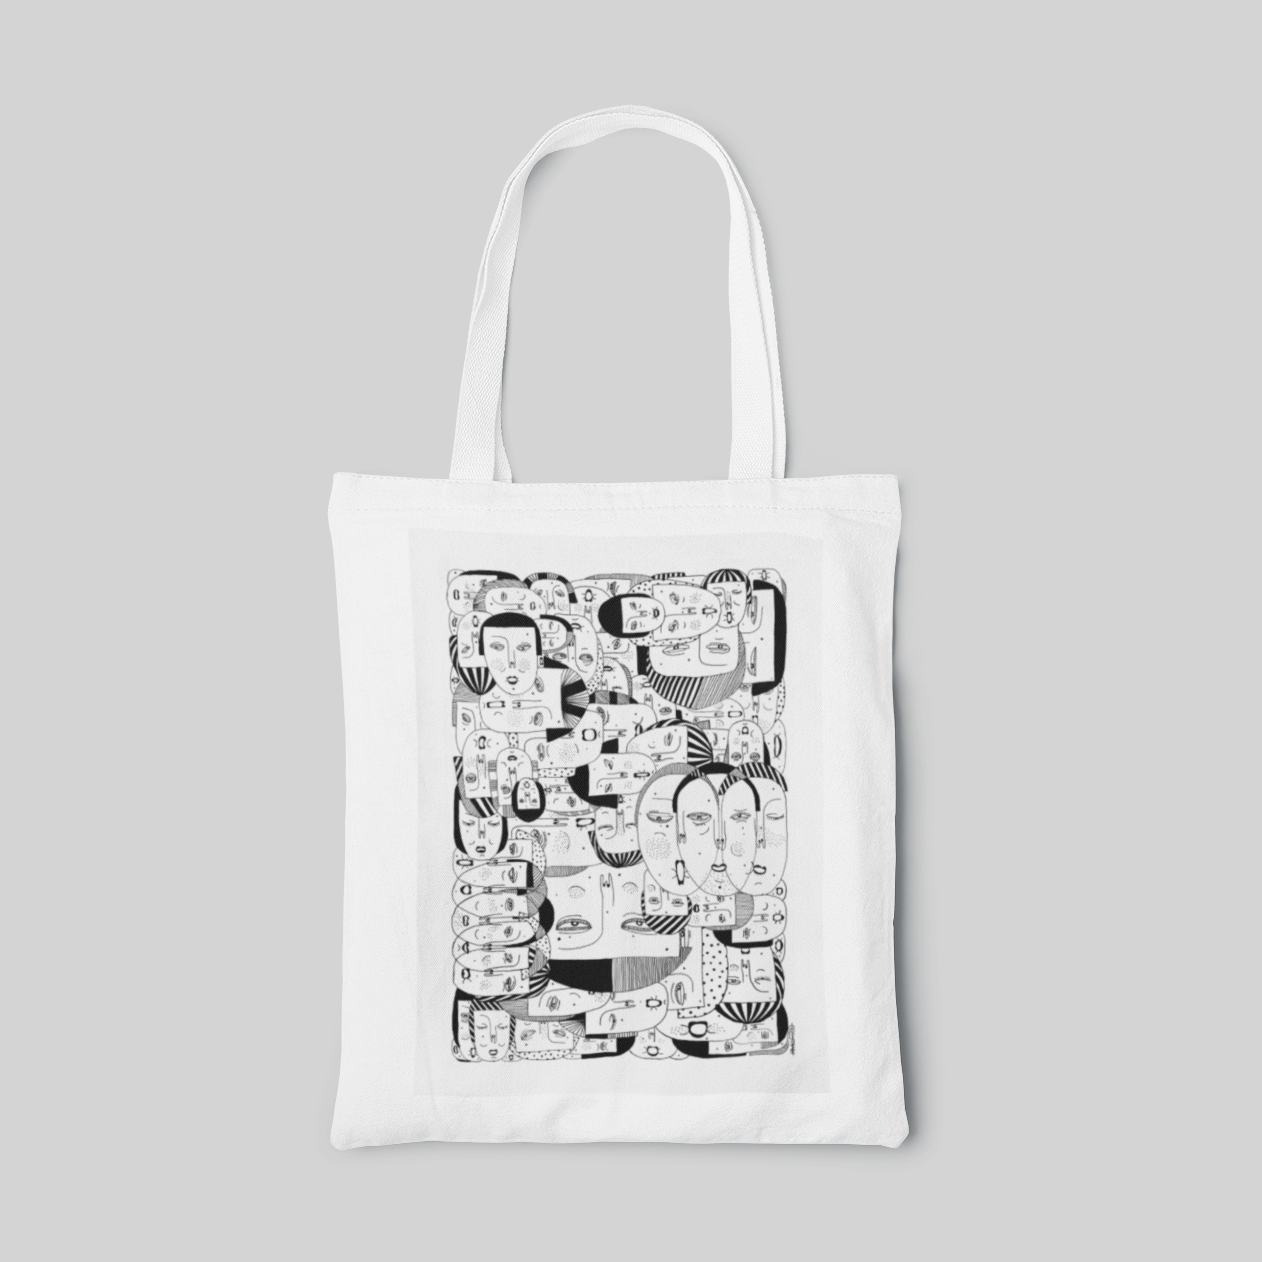 White lowbrow designed tote bag with monochrome caricature face illustration patterns, front side